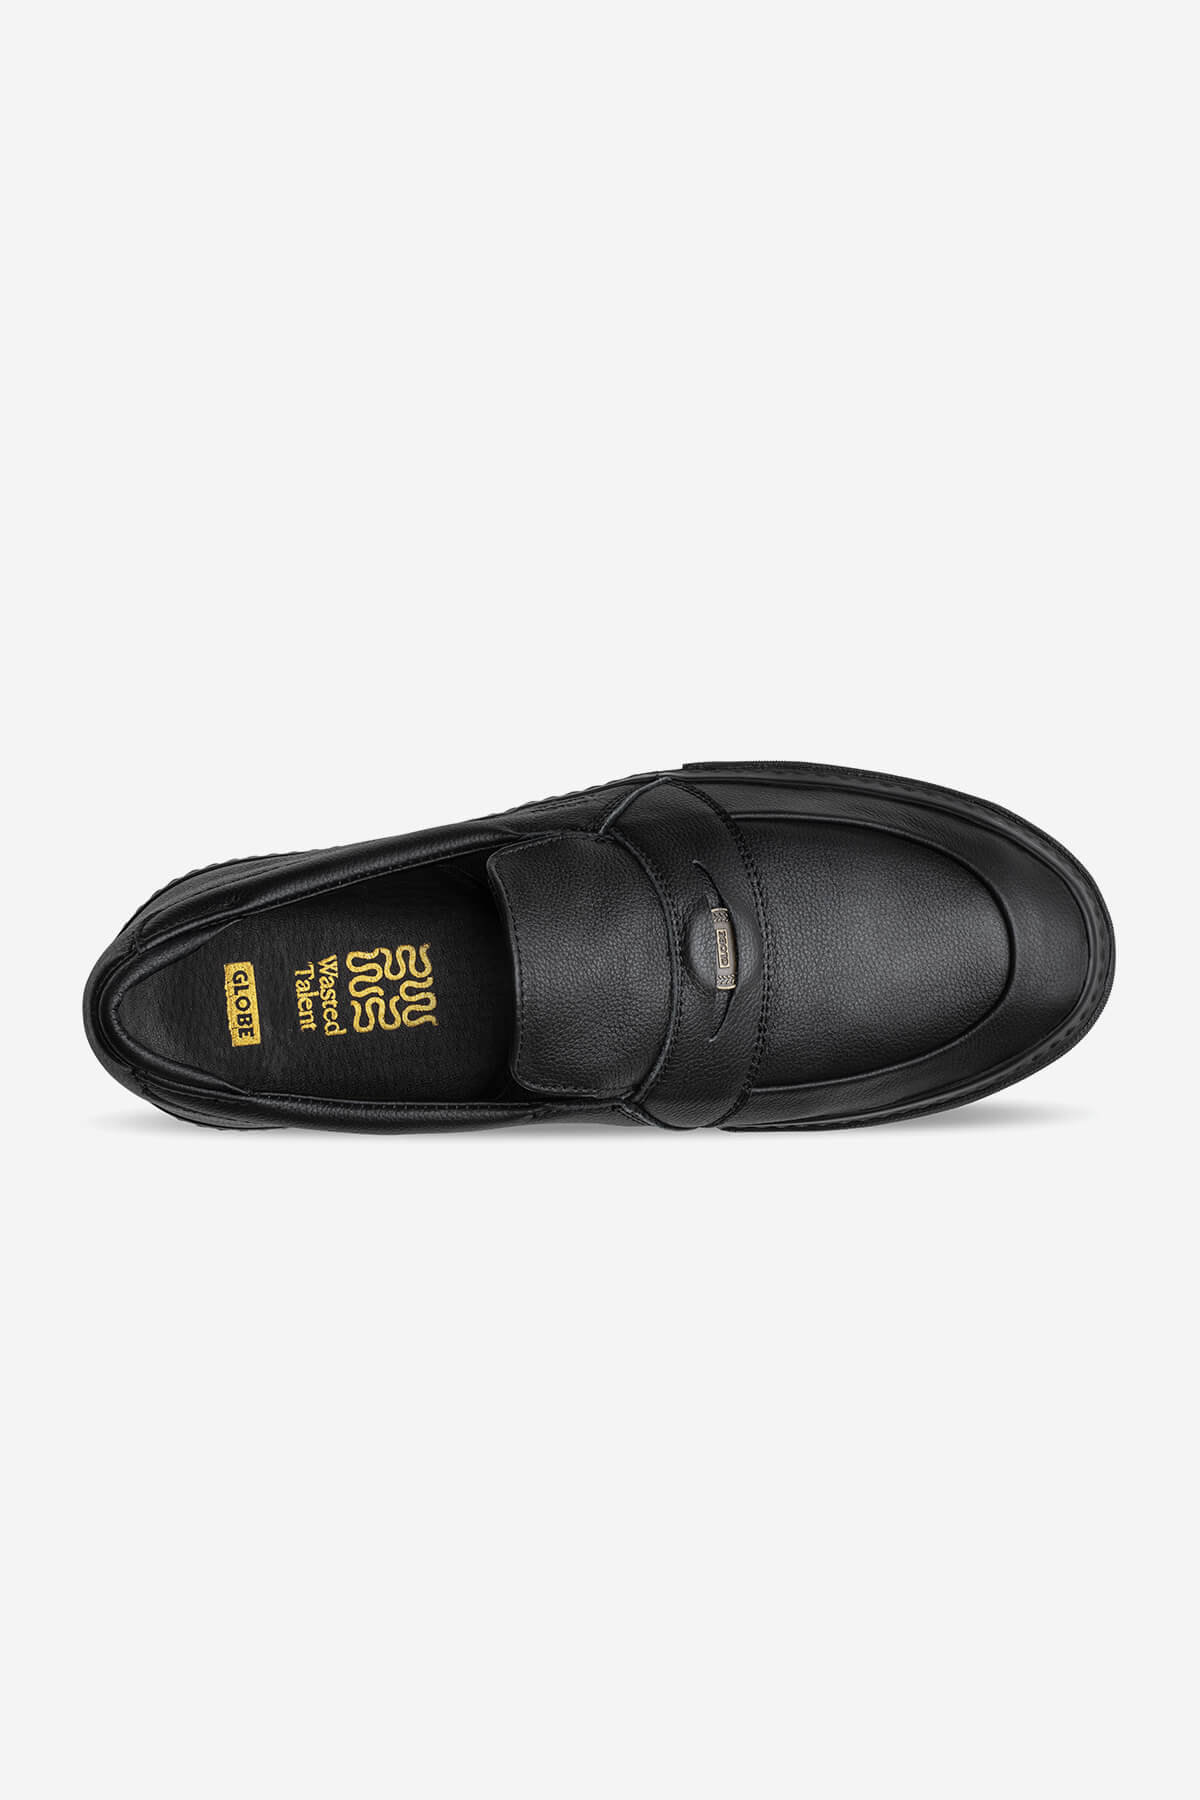 liaizon black wasted talent skateboard shoes